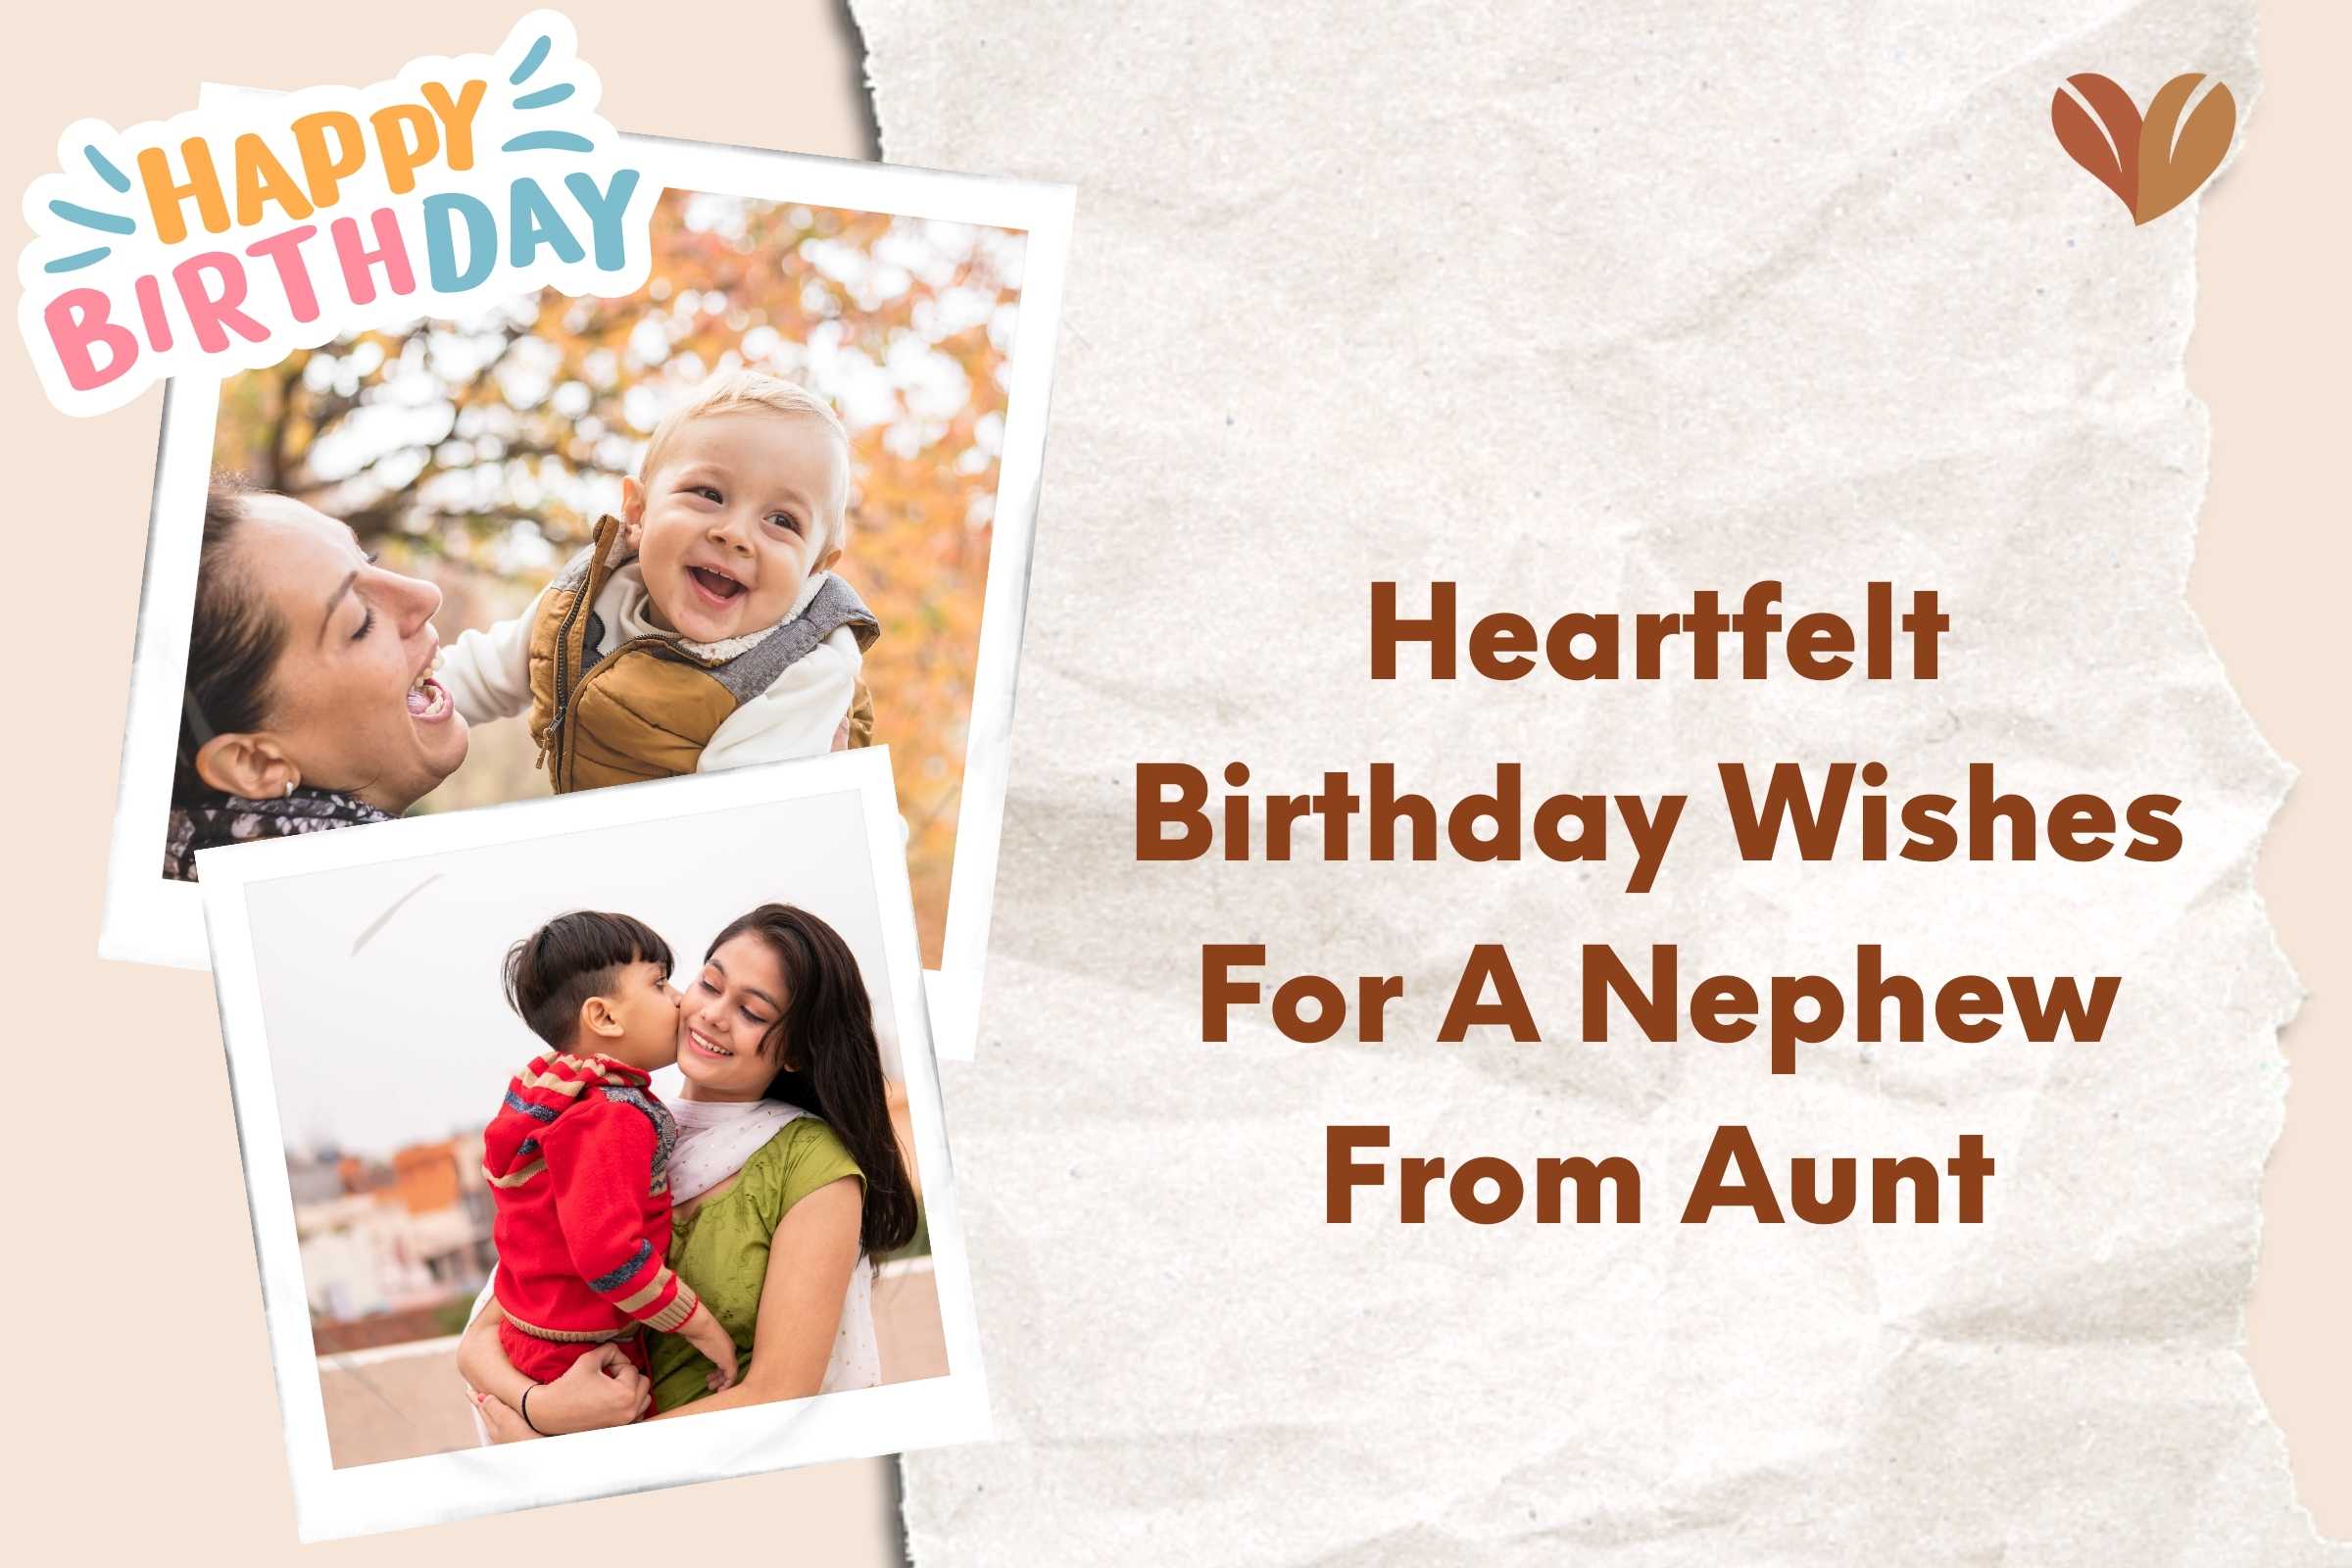 Aunt's warm wishes shine in this collection of ultimate birthday wishes for a nephew from aunt.